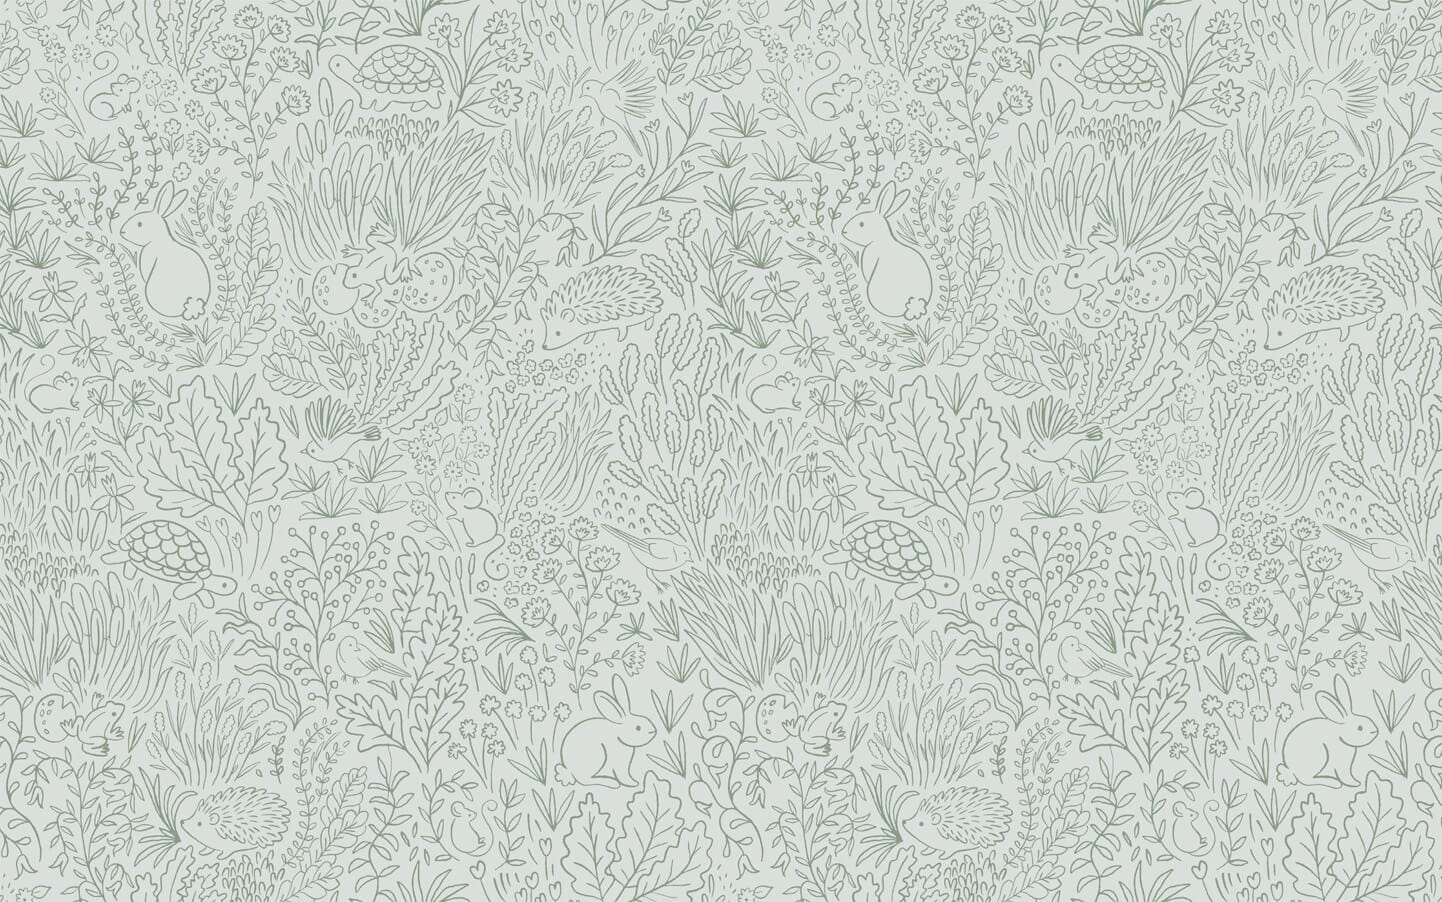 Wallpaper of sage green line work animals and florals such as rabbits, hedgehogs, frogs, tortoise, mice and birds.